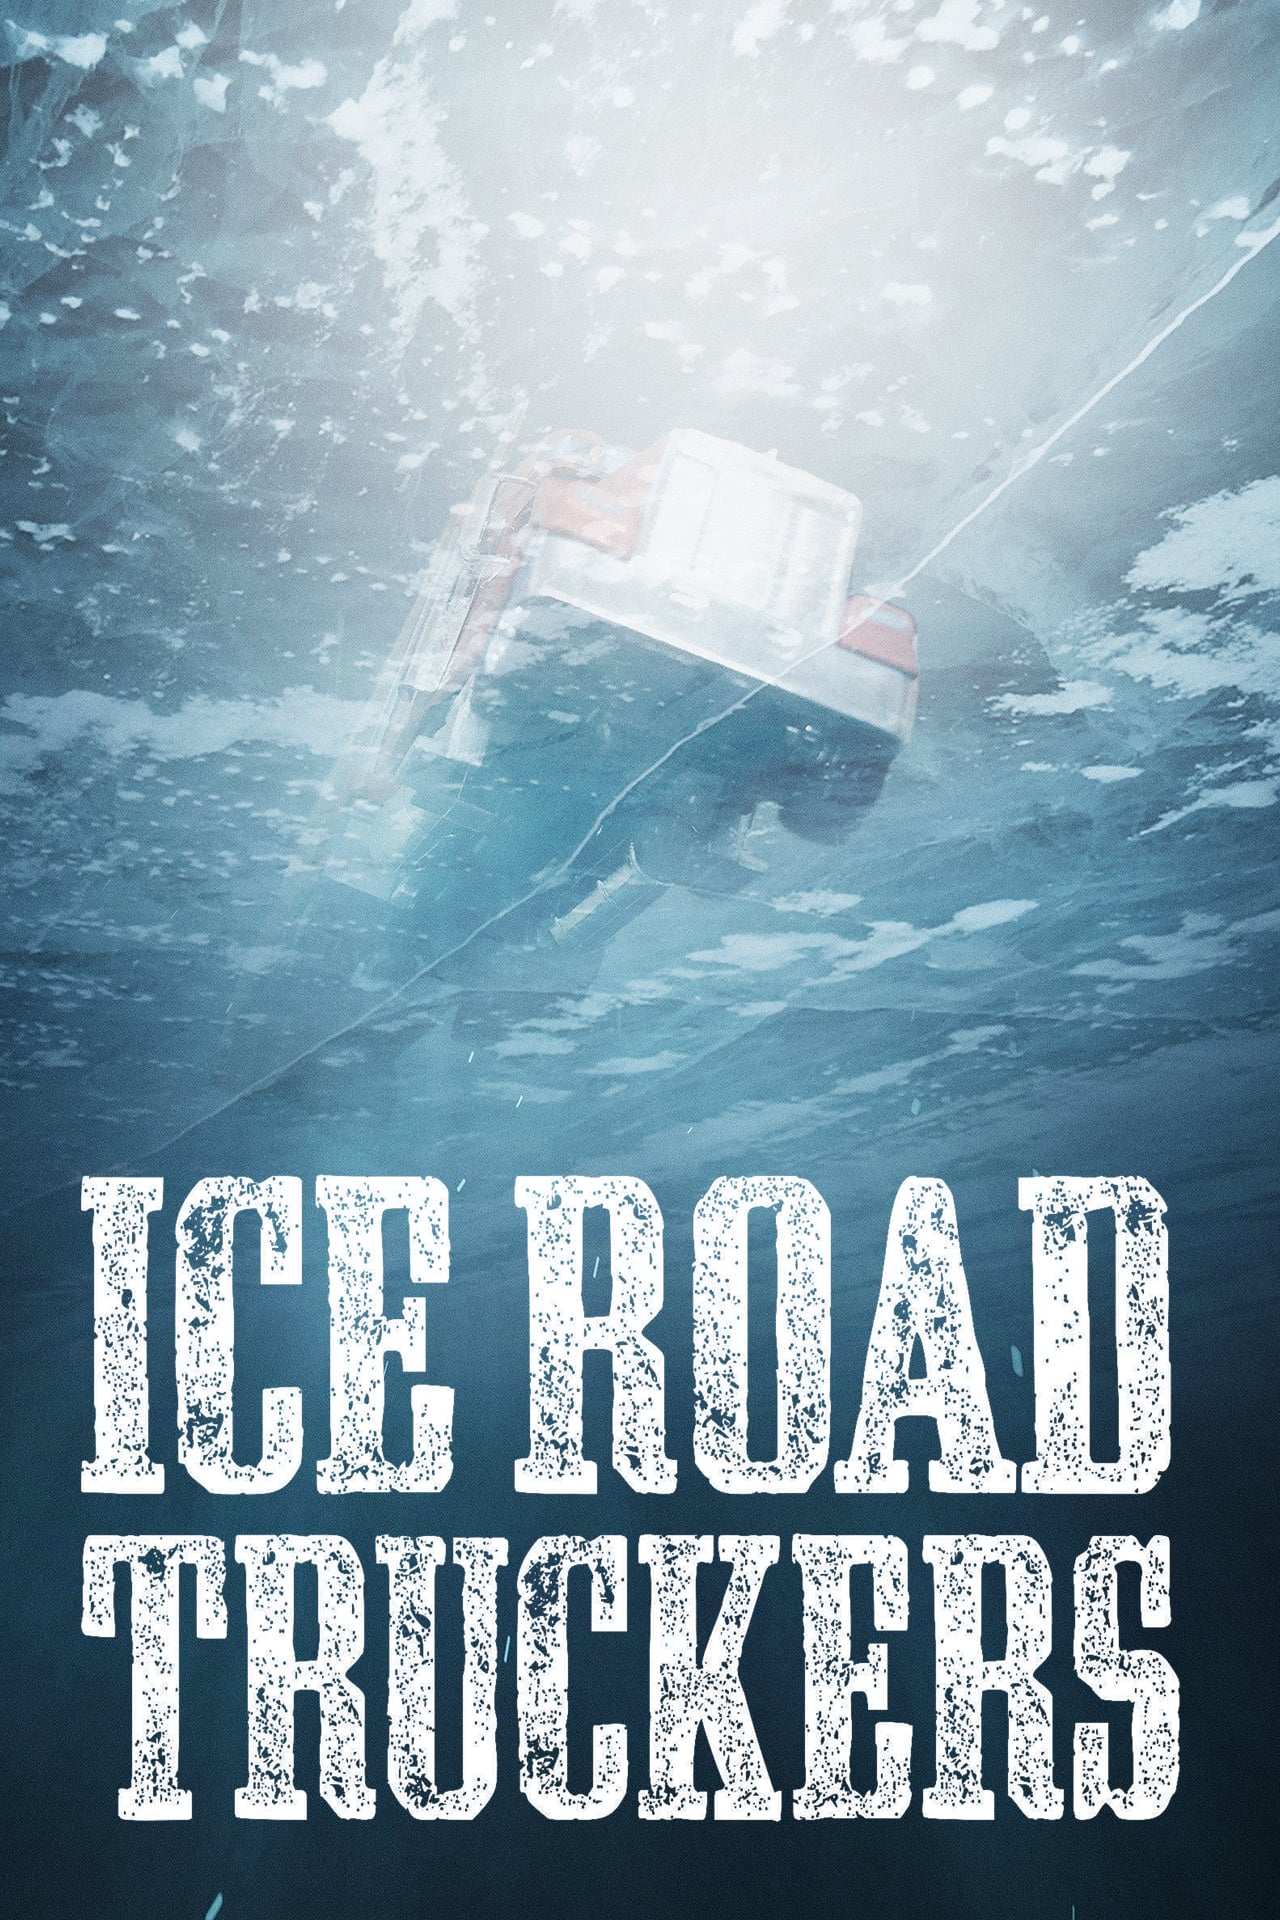 Ice Road Truckers poster